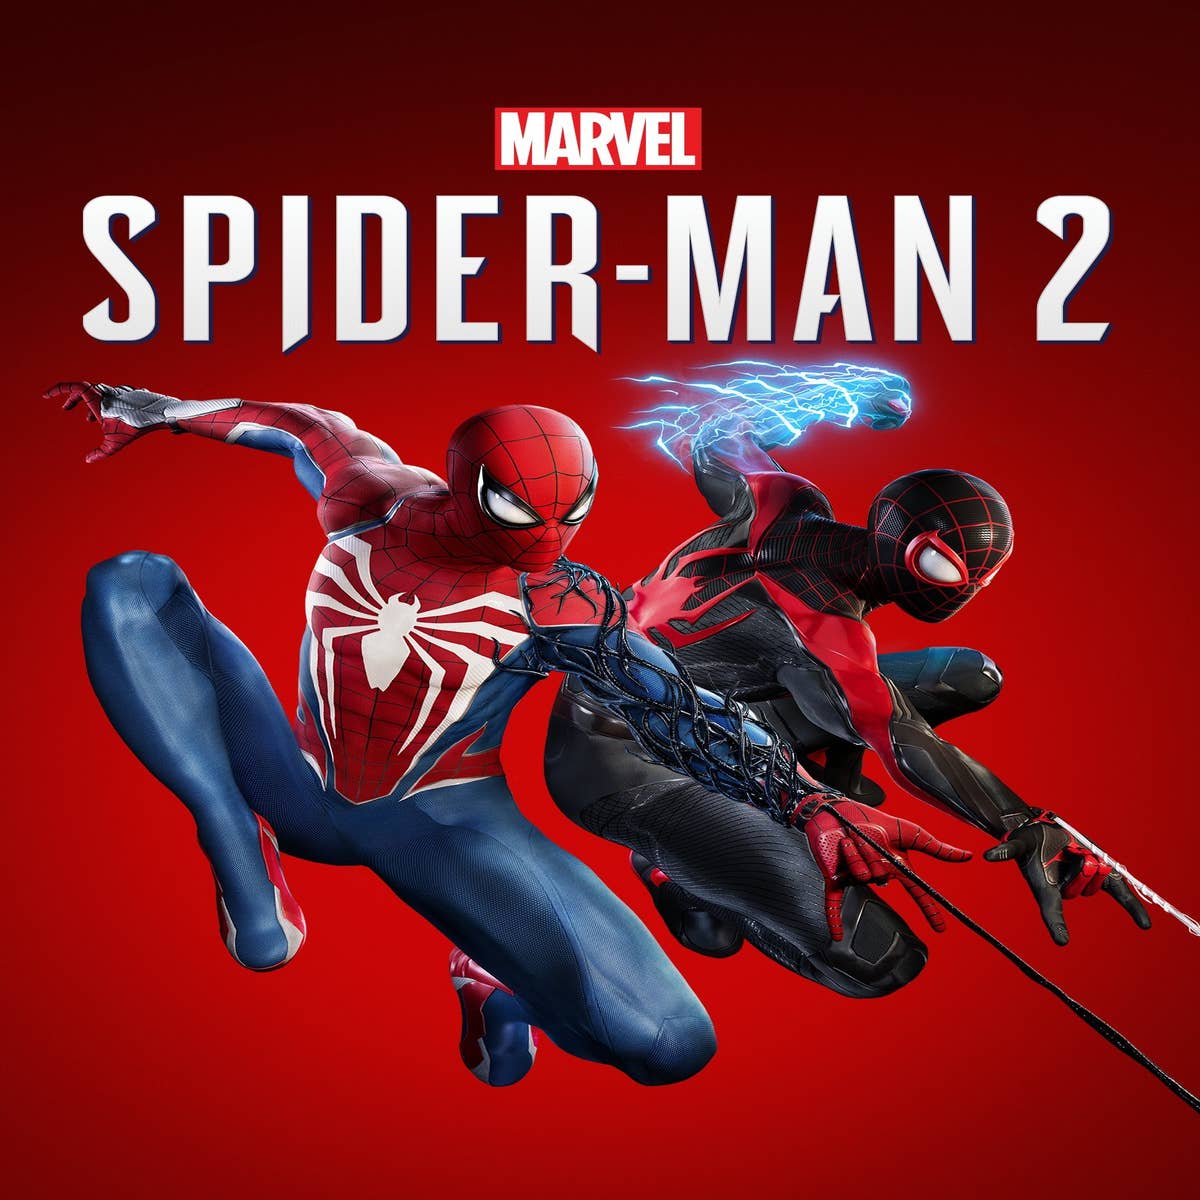 The Amazing Spider-Man Free Download Archives « Install Guide Games